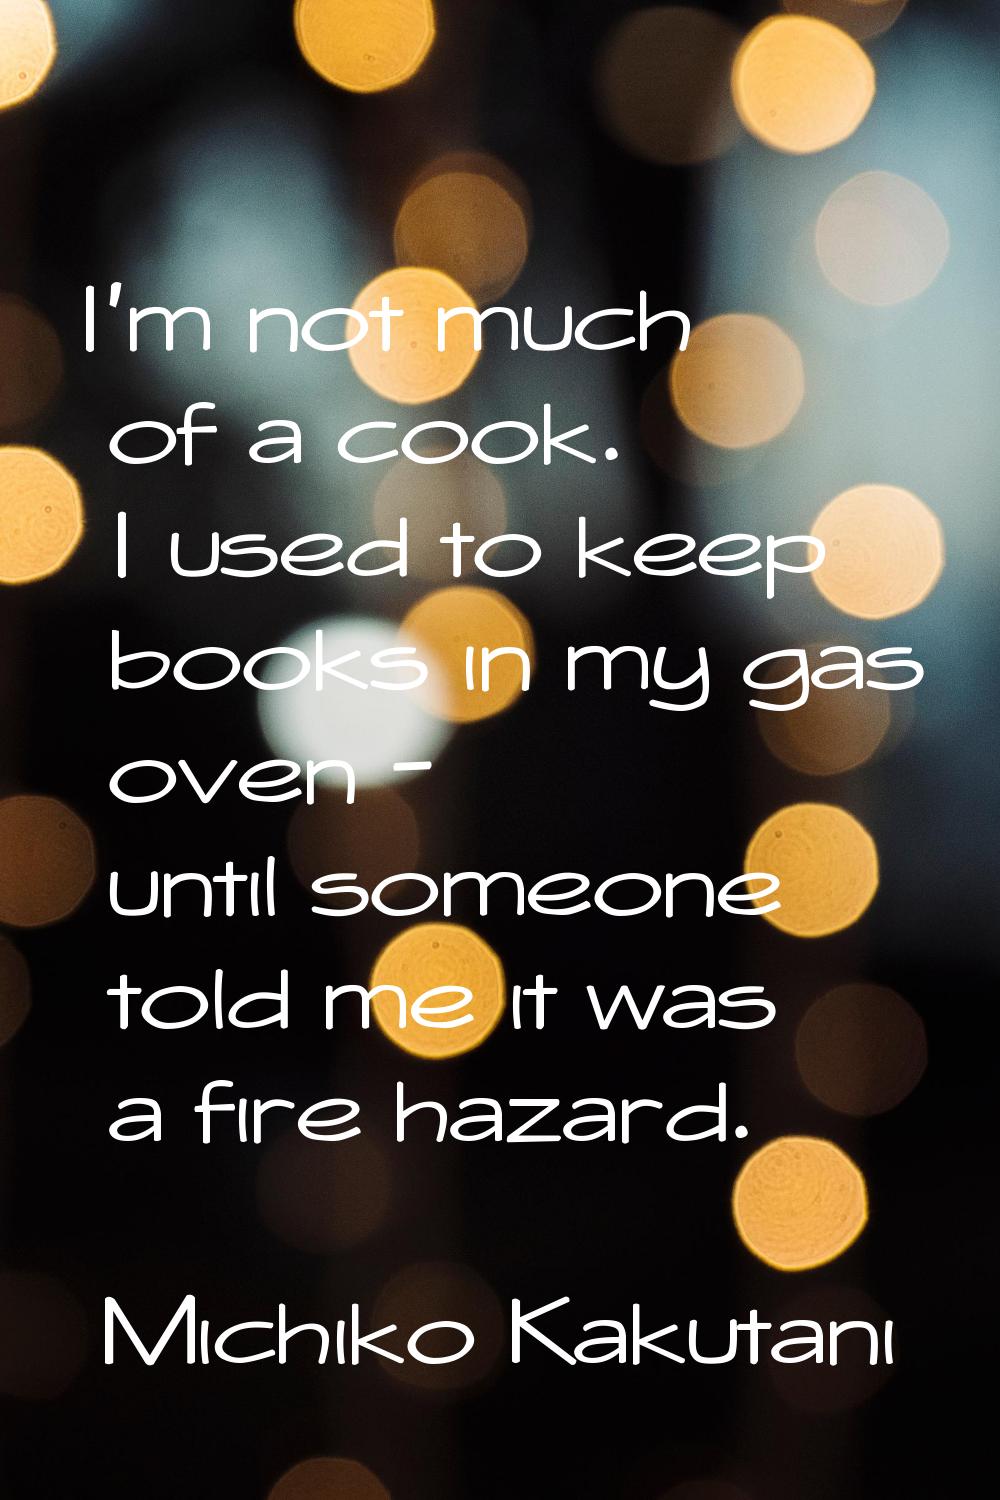 I'm not much of a cook. I used to keep books in my gas oven - until someone told me it was a fire h